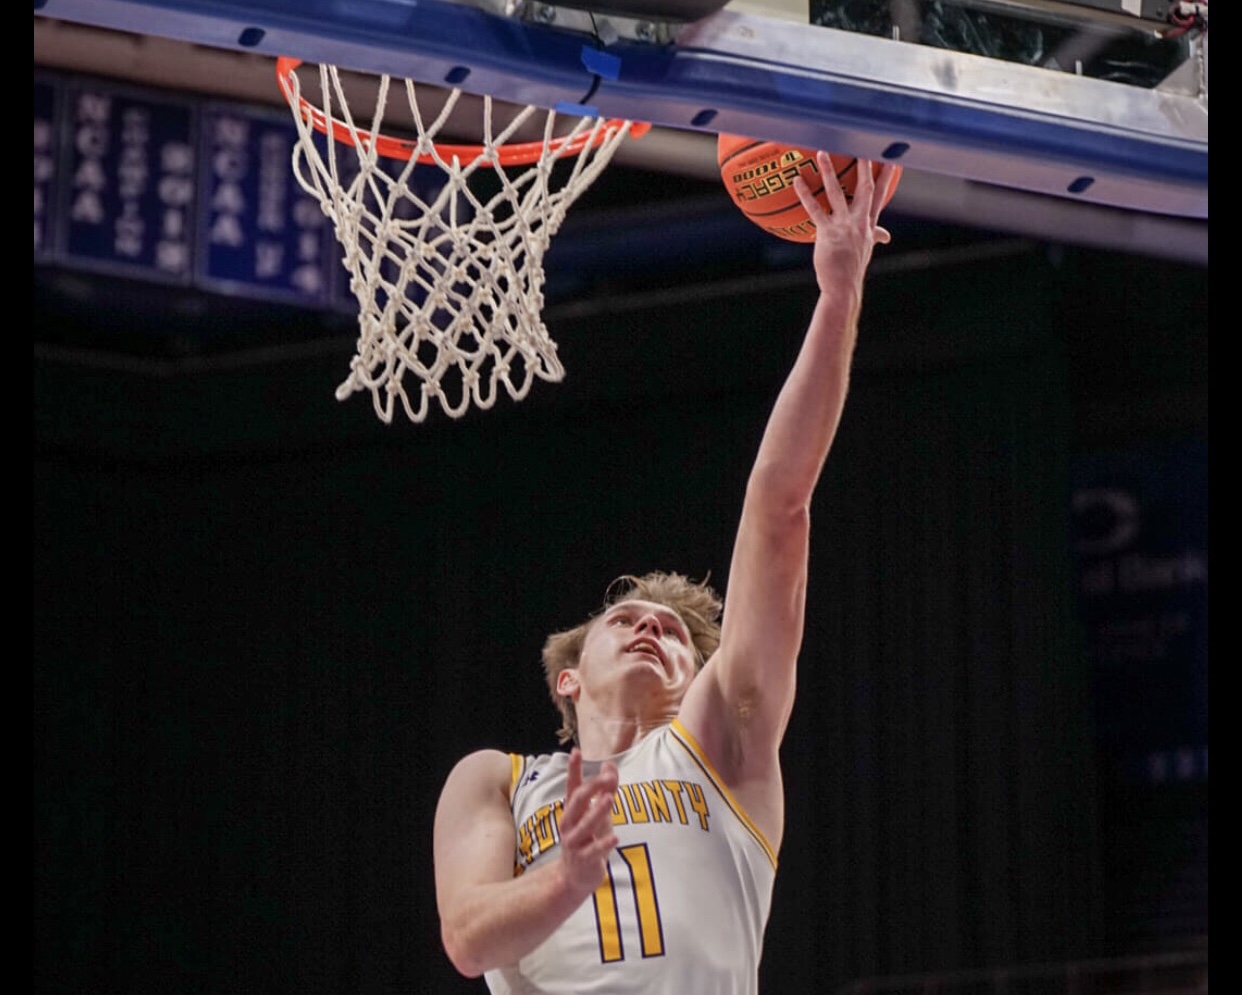 SWEET 16 TOURNAMENT: Lyon County’s Perry passes ‘King Kelly’ in win over Newport